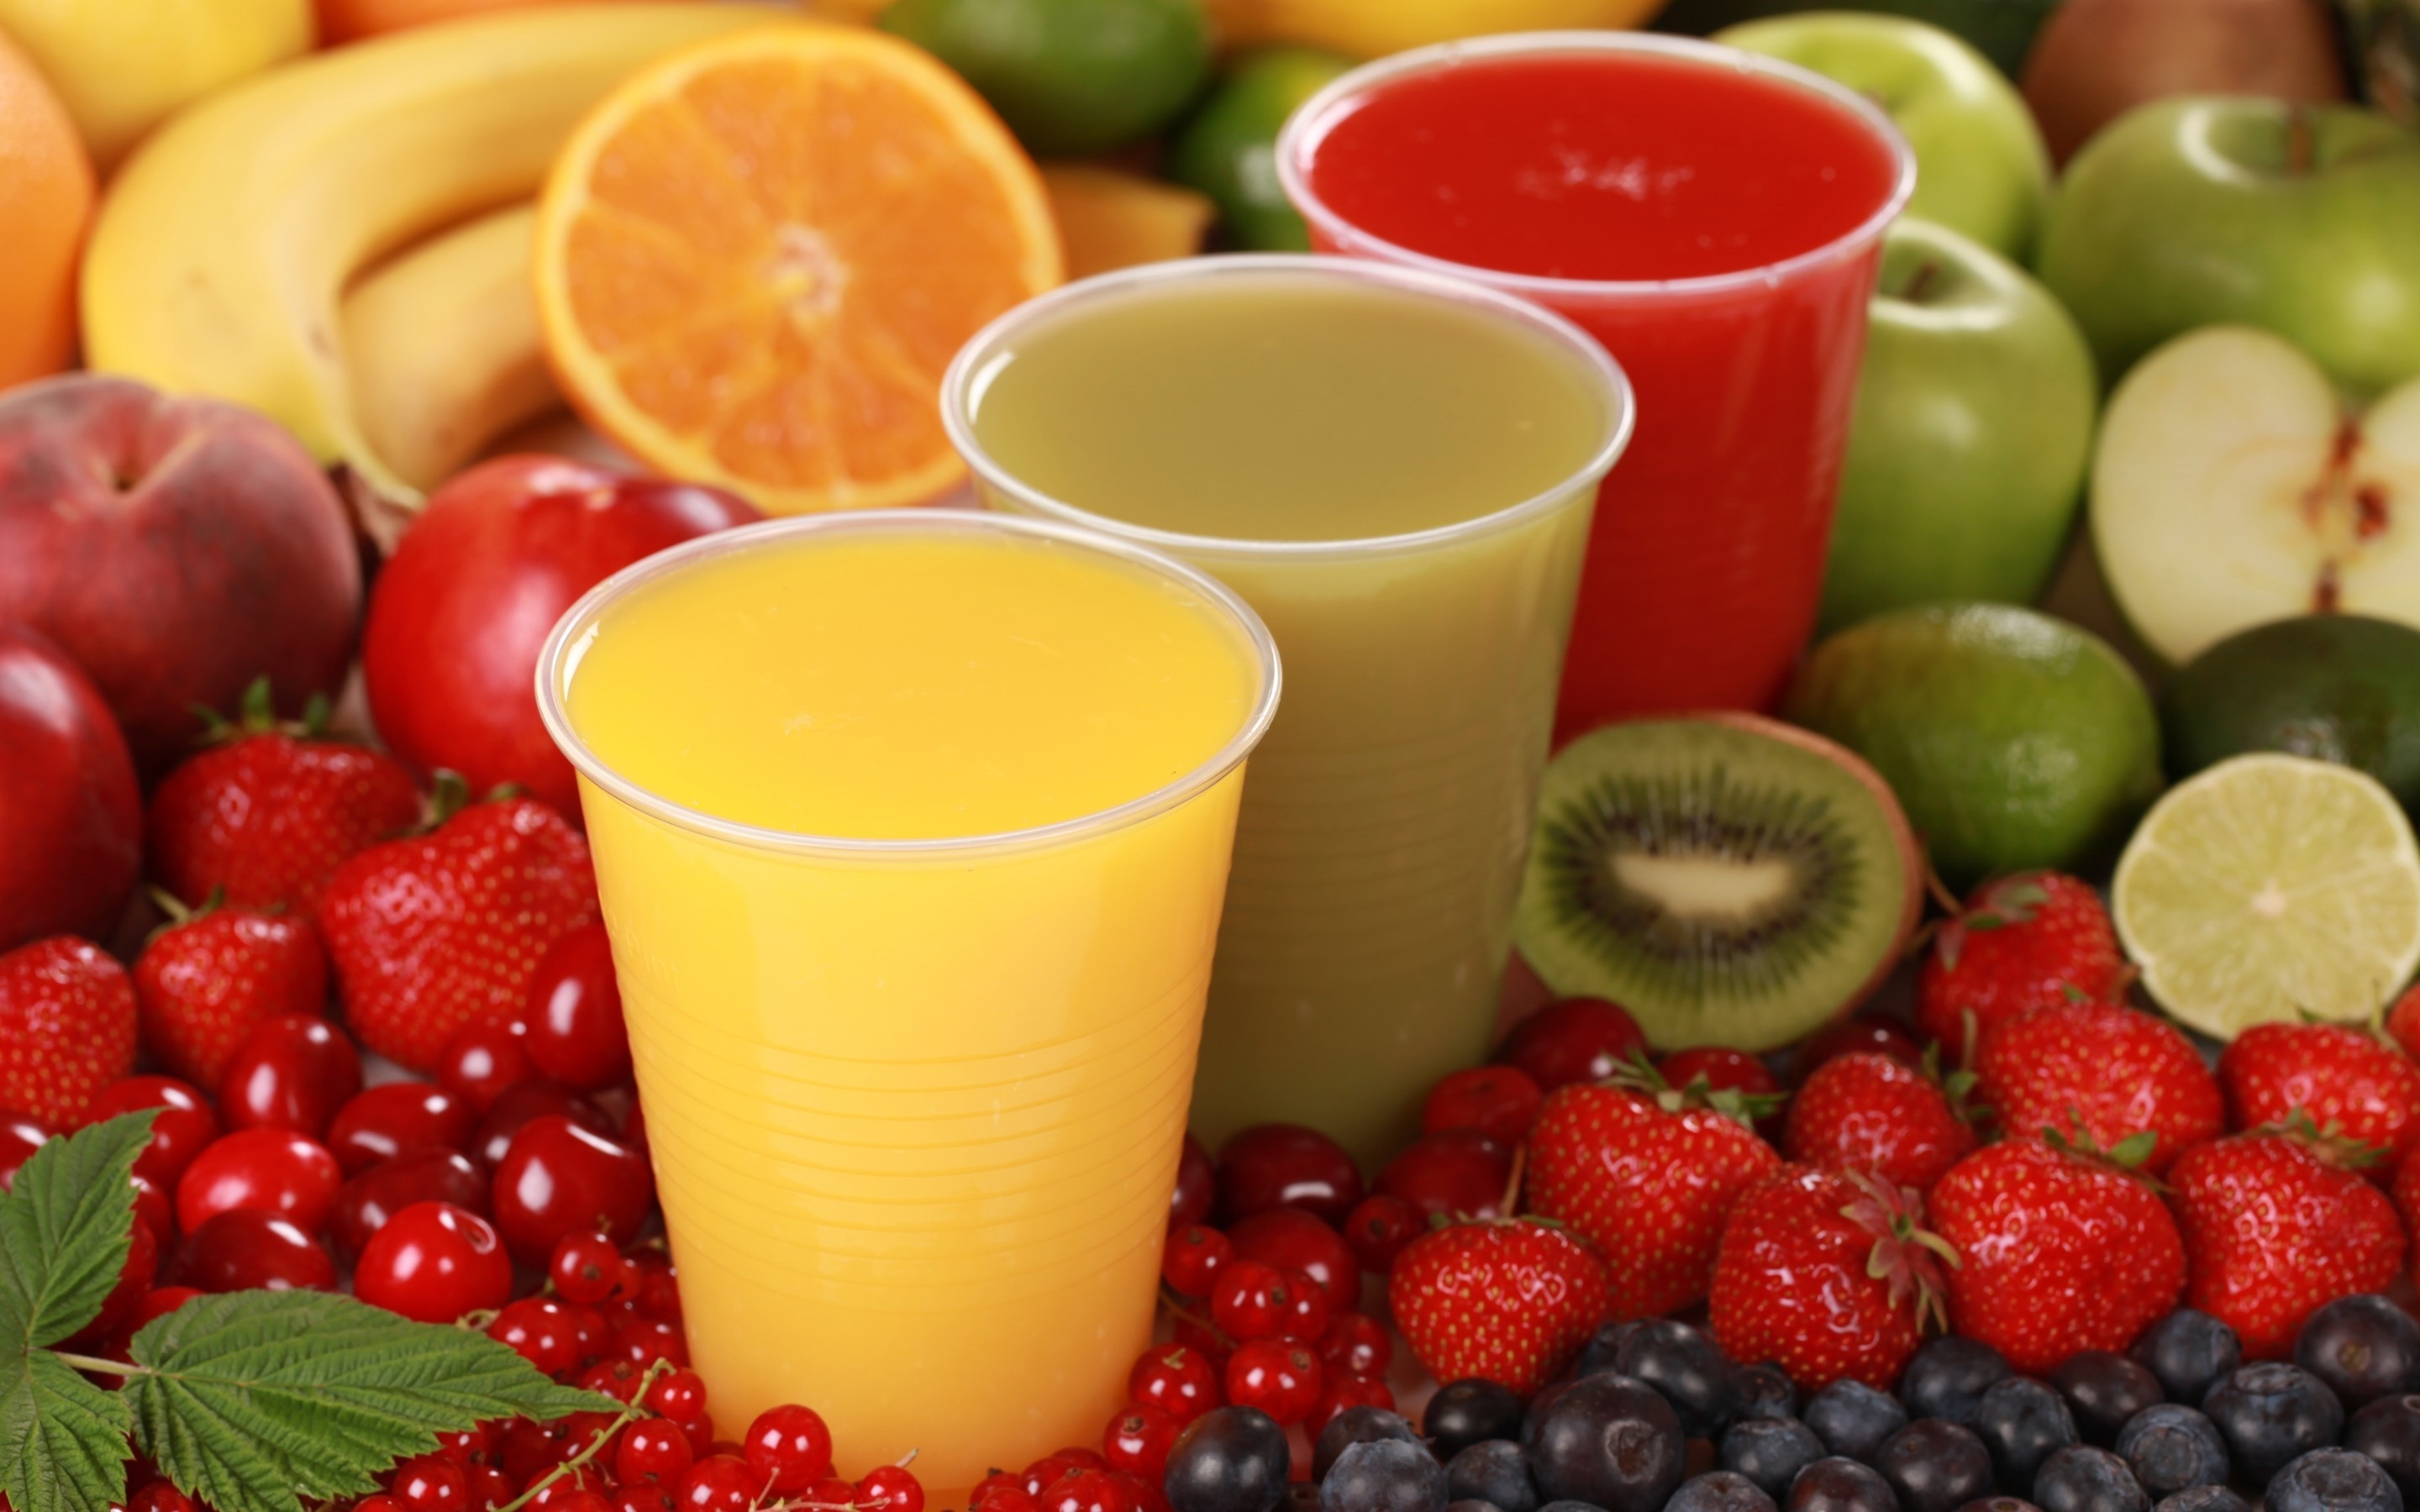 Fruits Juices for 2880 x 1800 Retina Display resolution